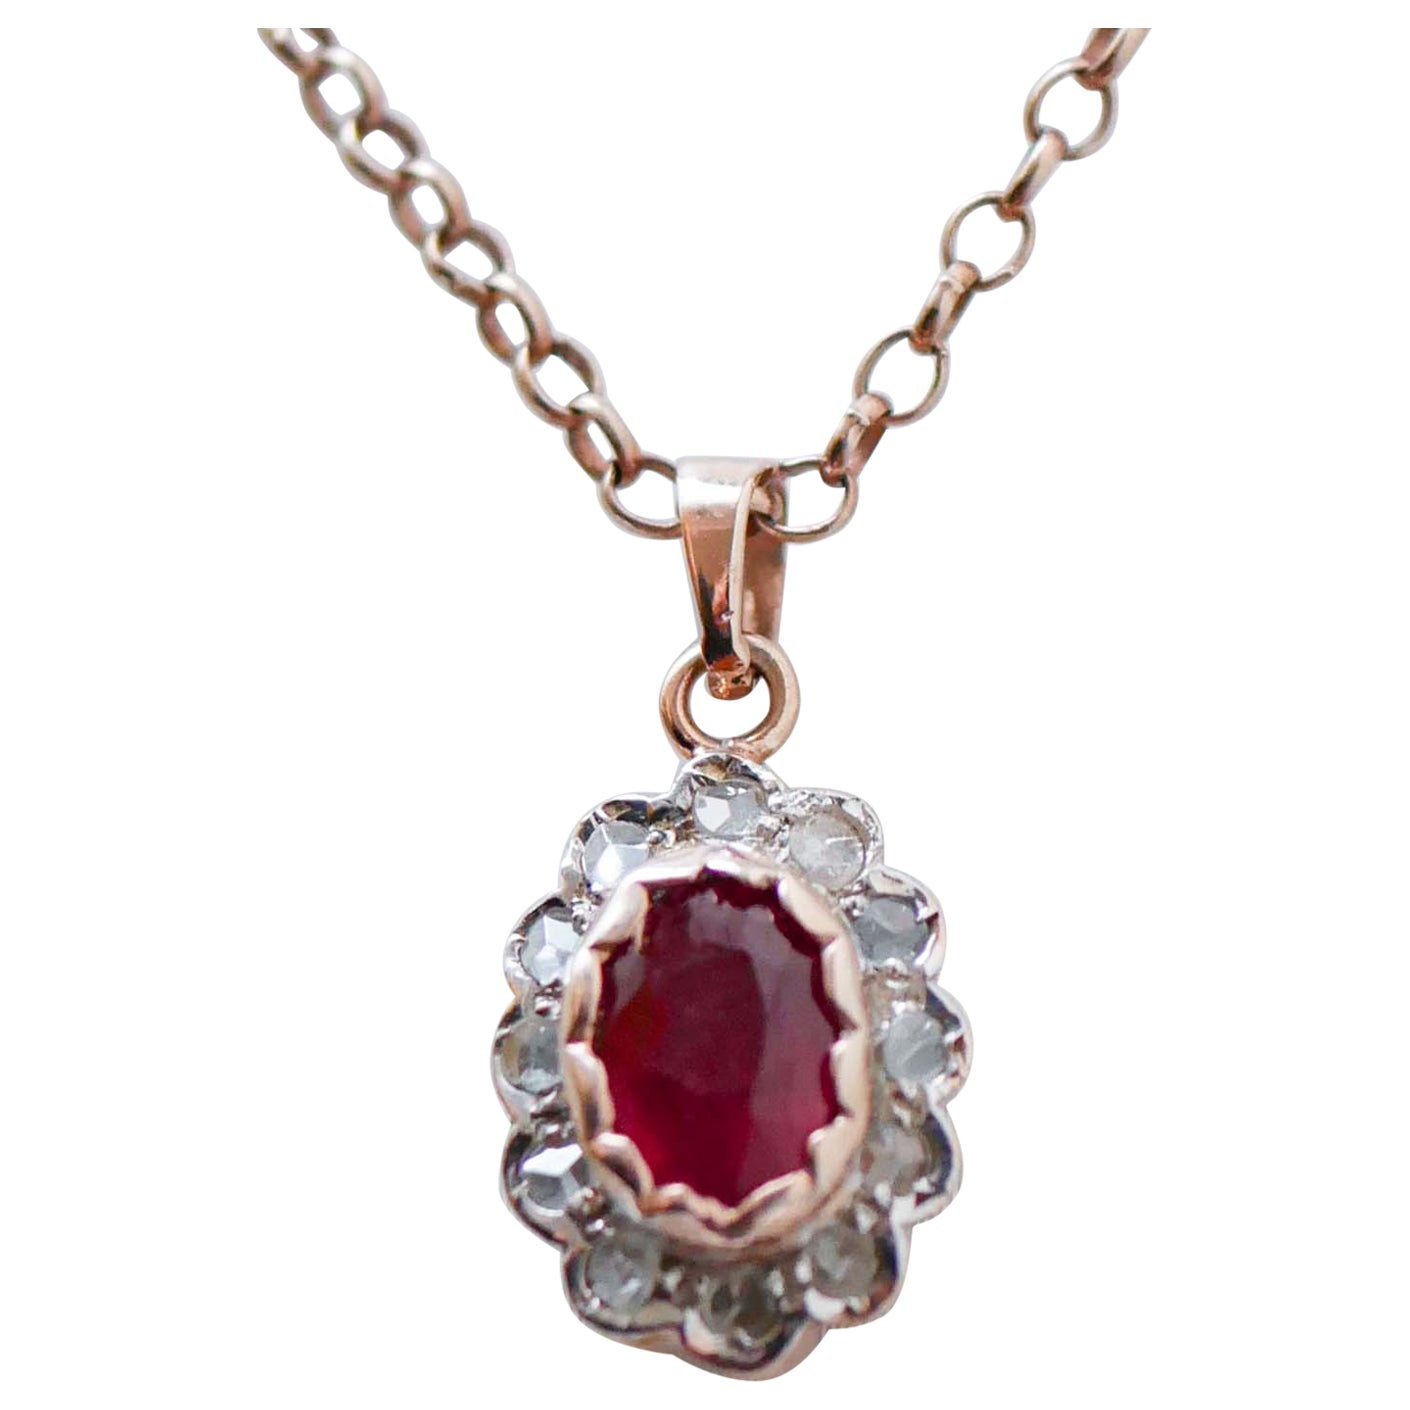 Ruby, Diamonds, Rose Gold and Silver Pendant Necklace.